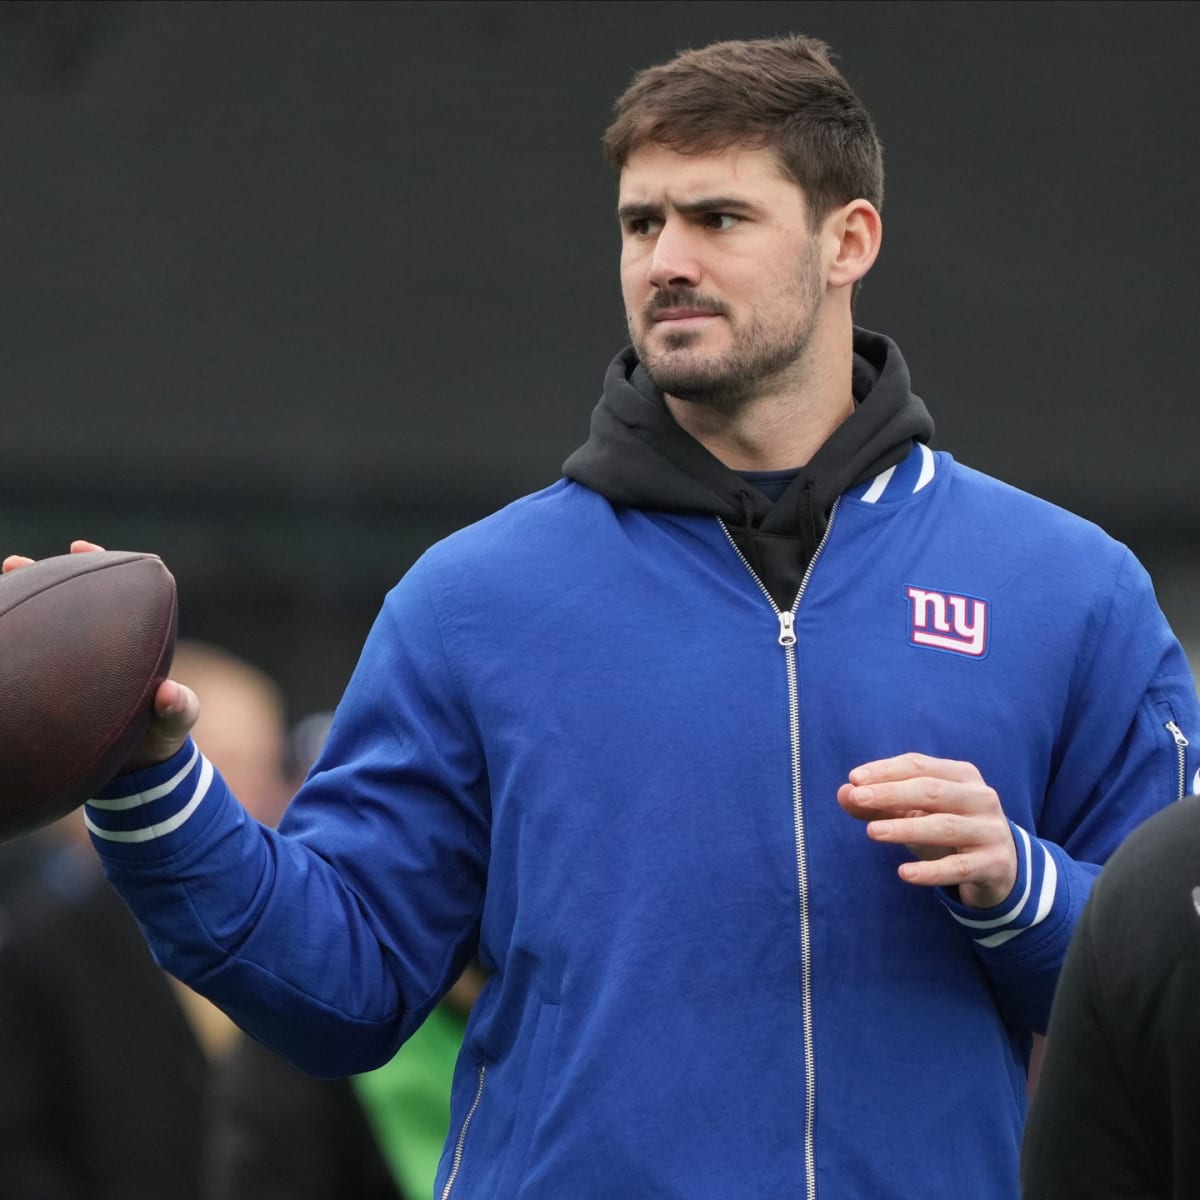 Giants are 'absolutely done' with Daniel Jones, NFL Network host says